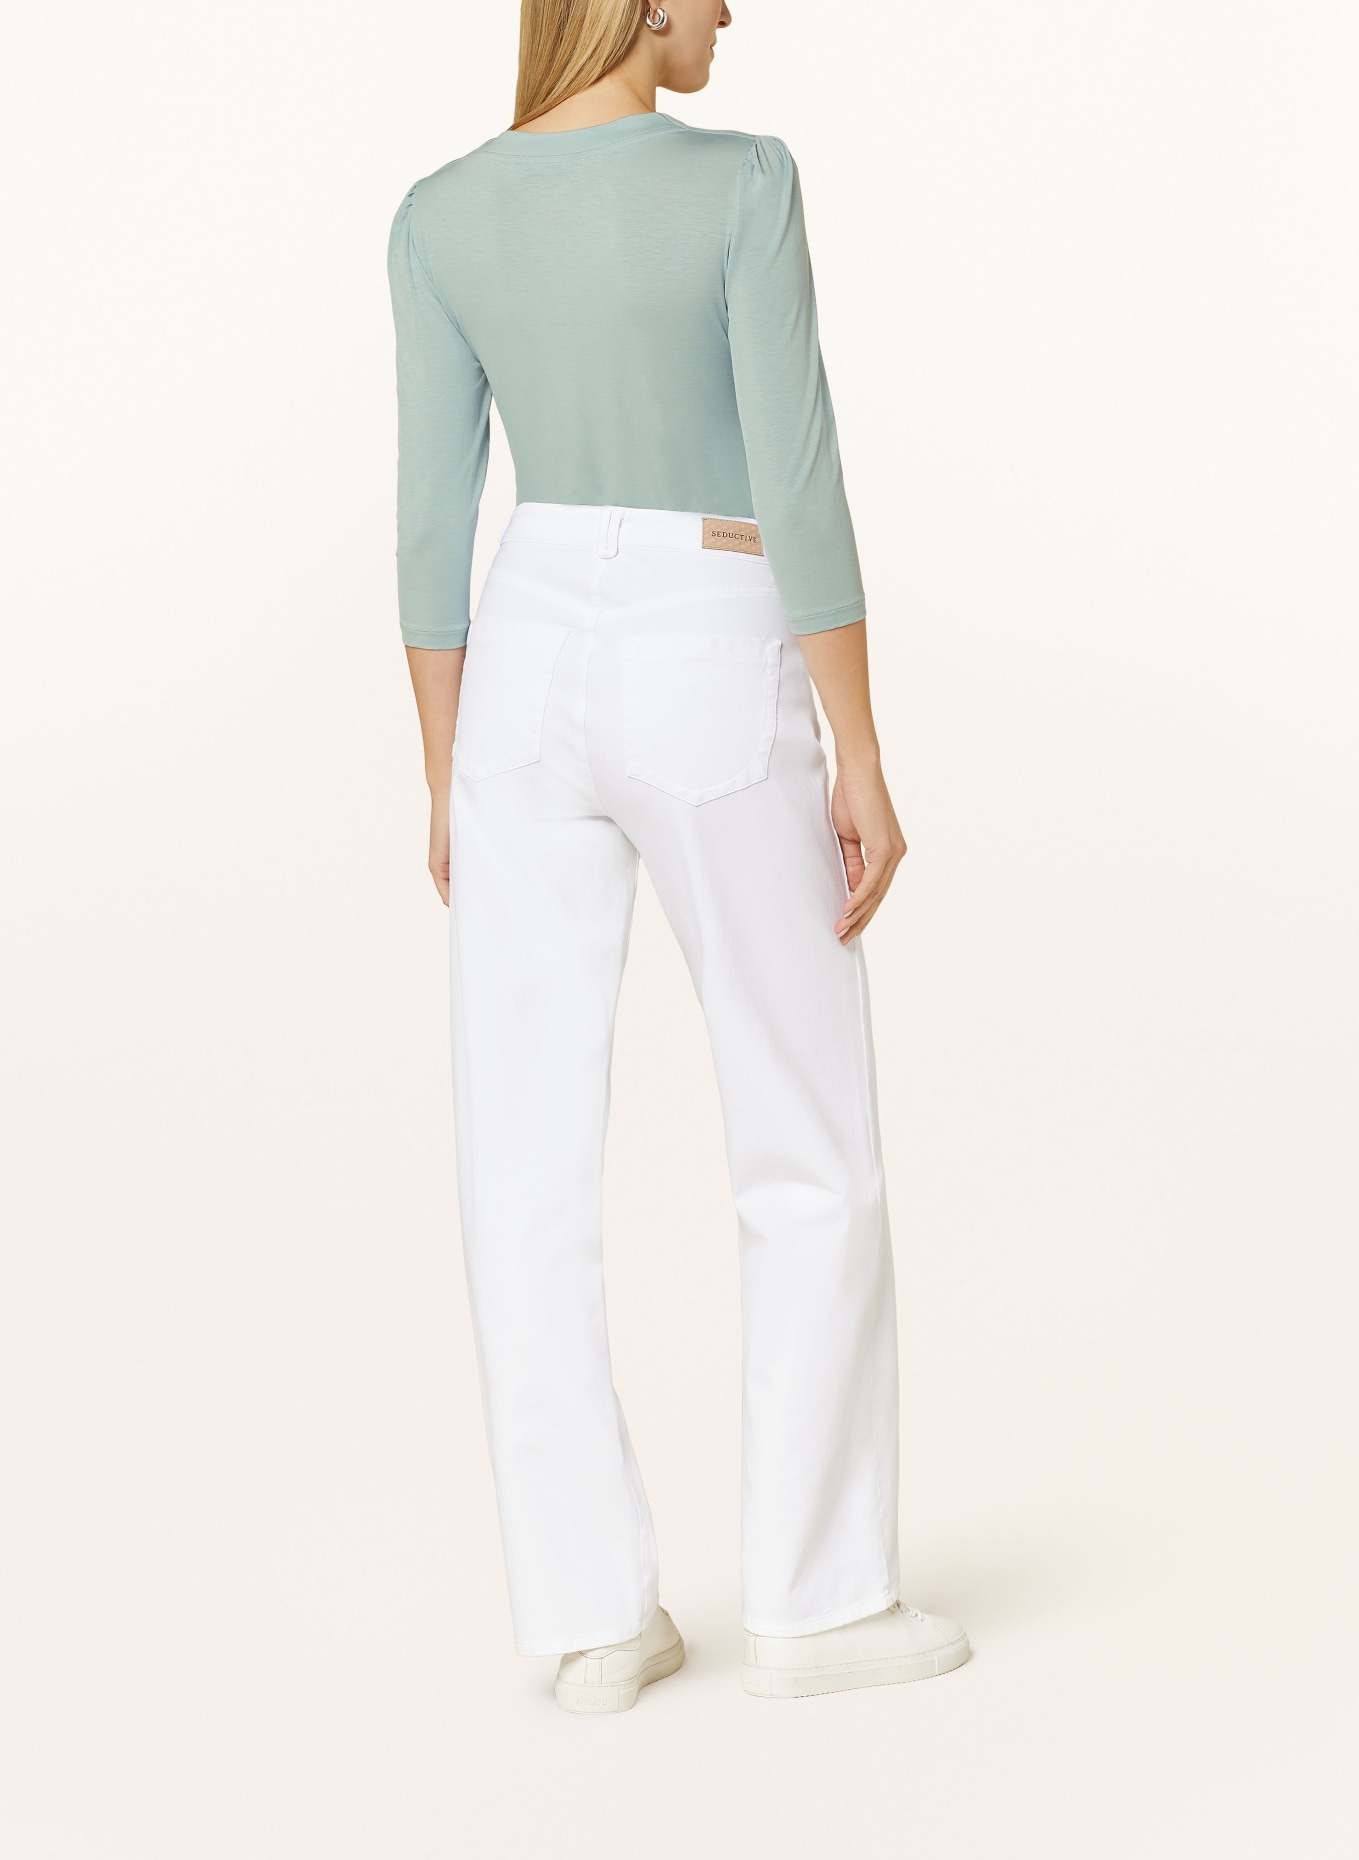 BEAUMONT Shirt with 3/4 sleeves, Color: LIGHT BLUE (Image 3)